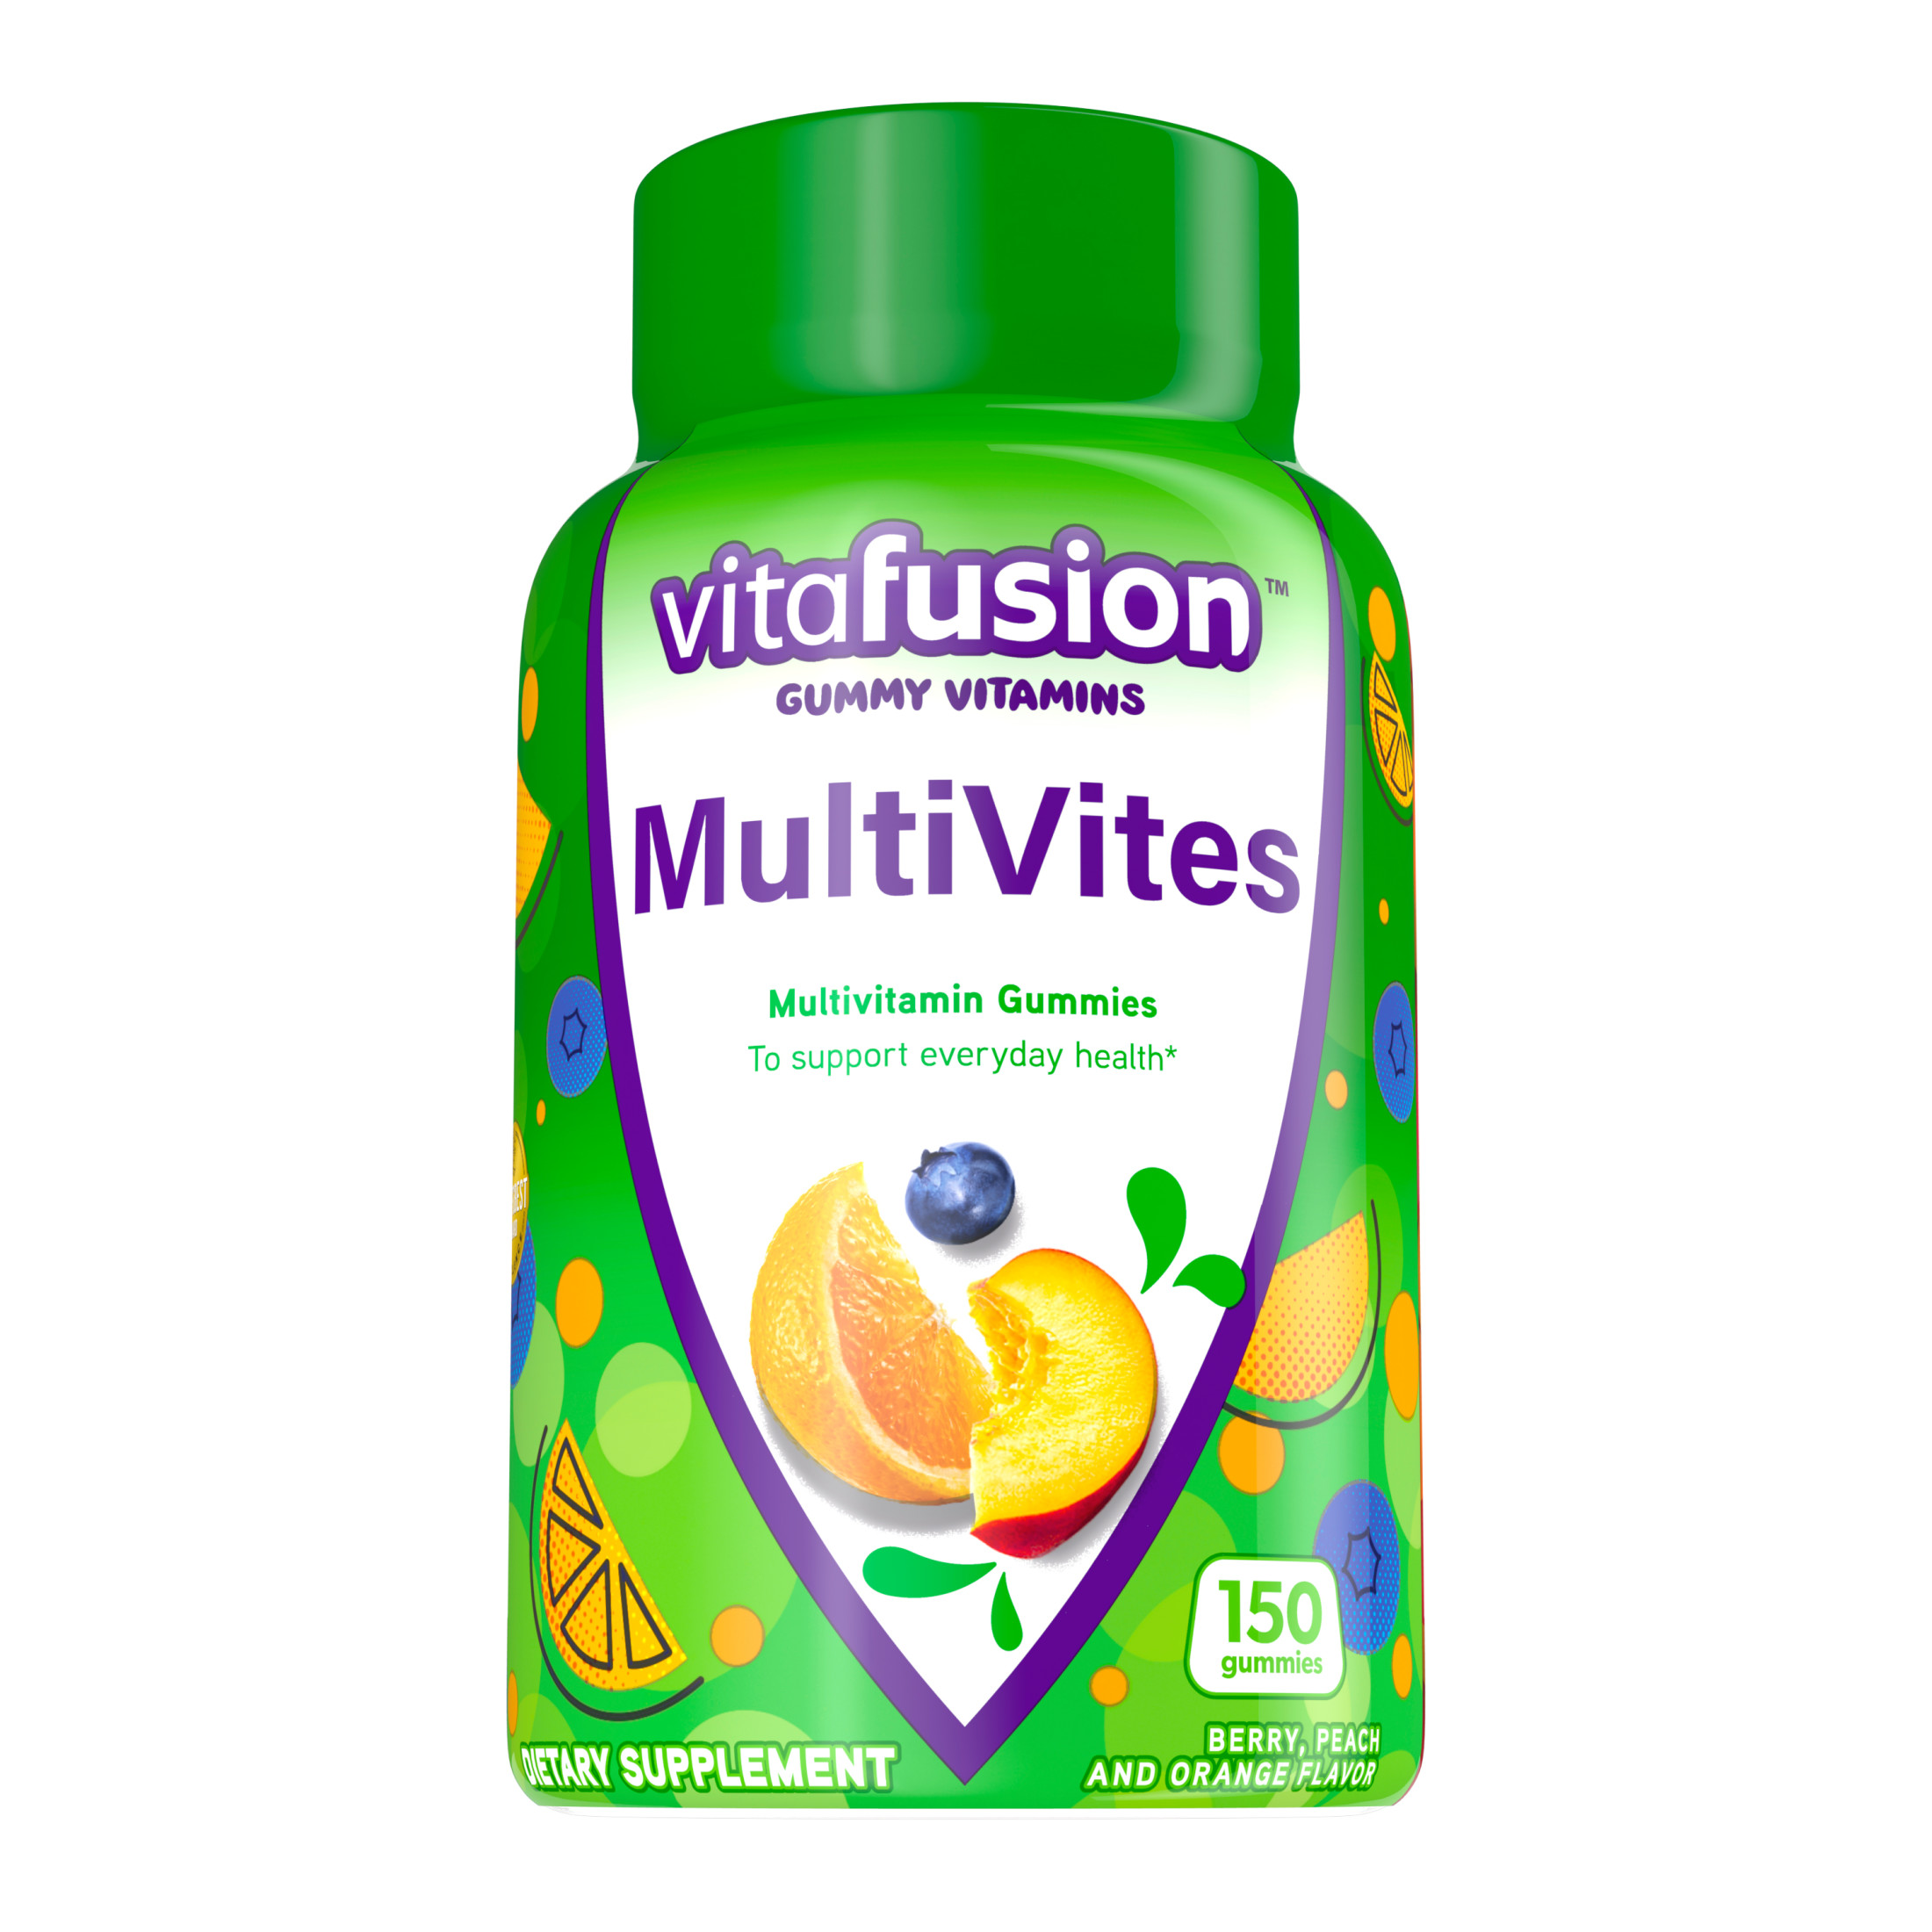 vitafusion MultiVites Gummy Multivitamins for Adults, Berry, Peach and Orange Flavored, 150 Count - image 1 of 9